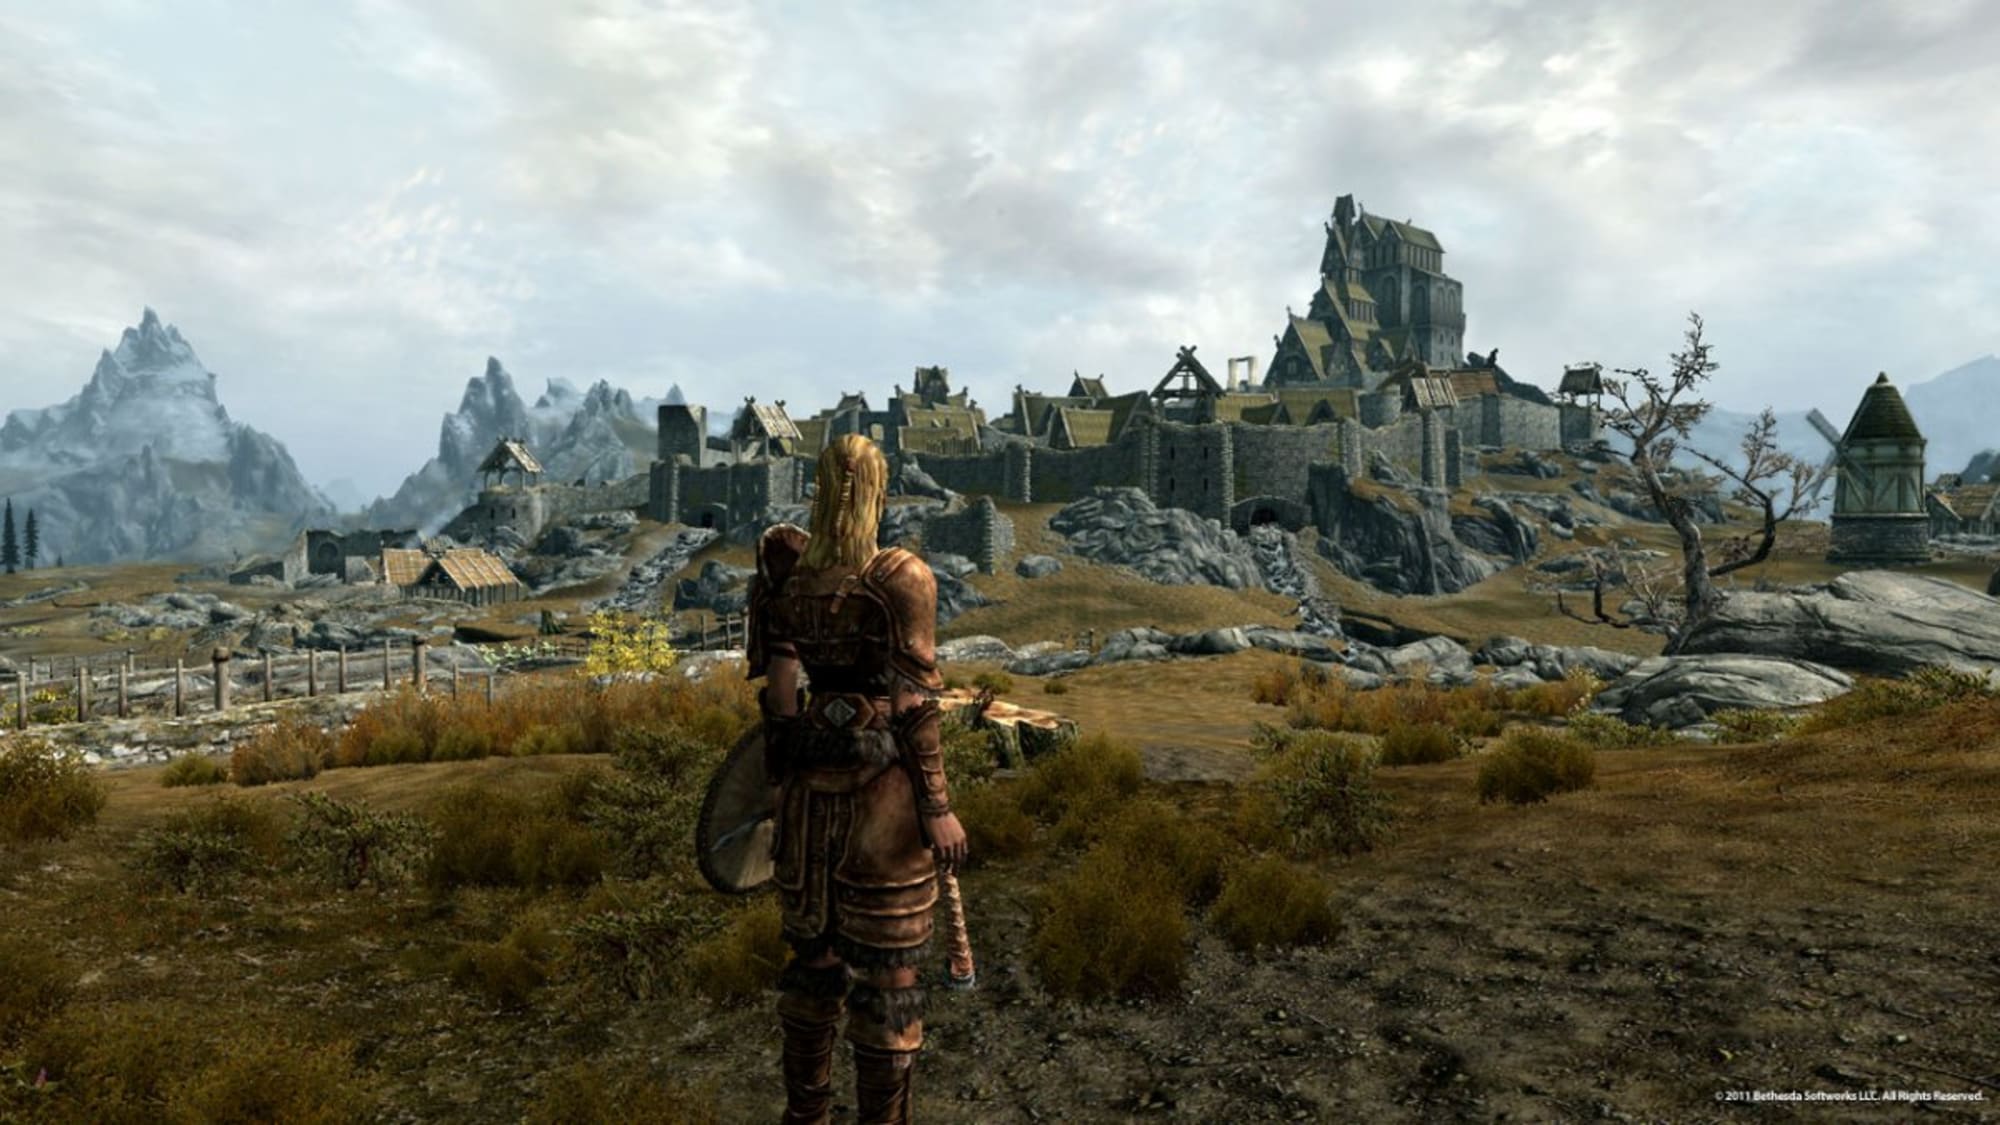 Skyrim, Fallout 4 Mods Support Cancelled On PS4